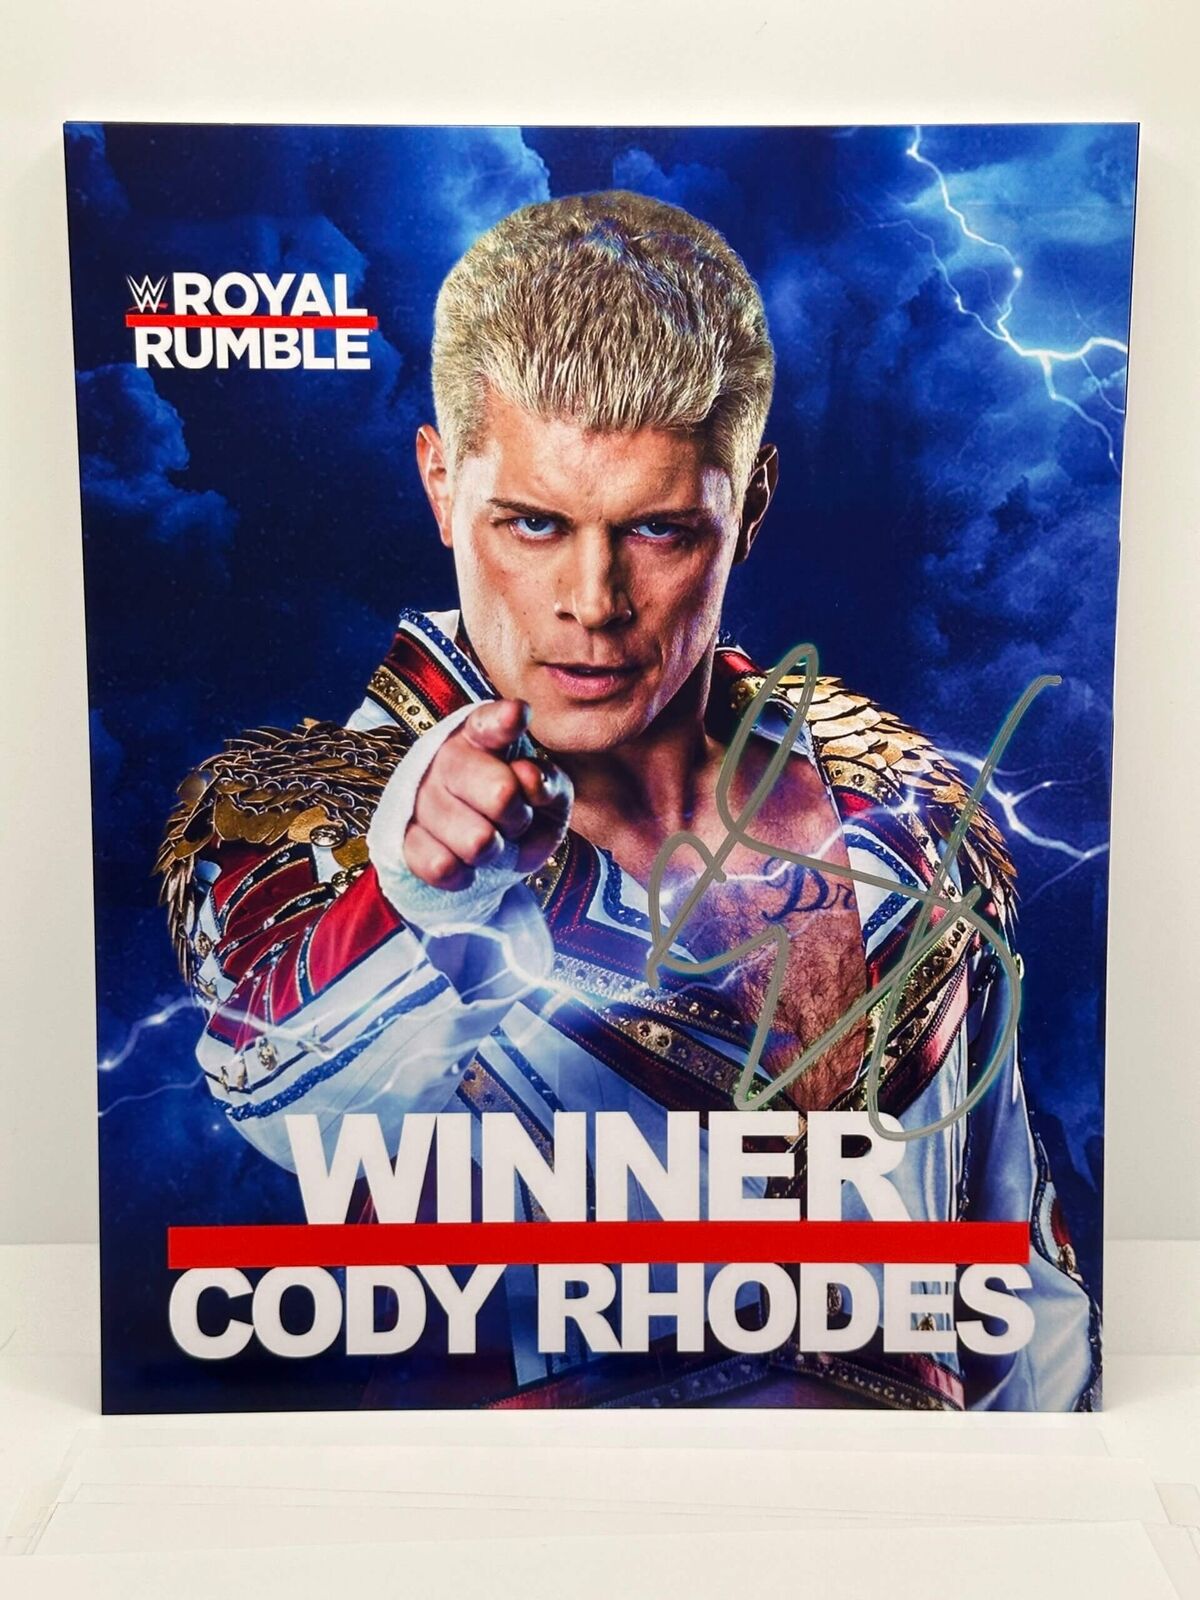 Cody Rhodes Royal Rumble Winner Signed Autographed Photo Authentic 8X10 COA